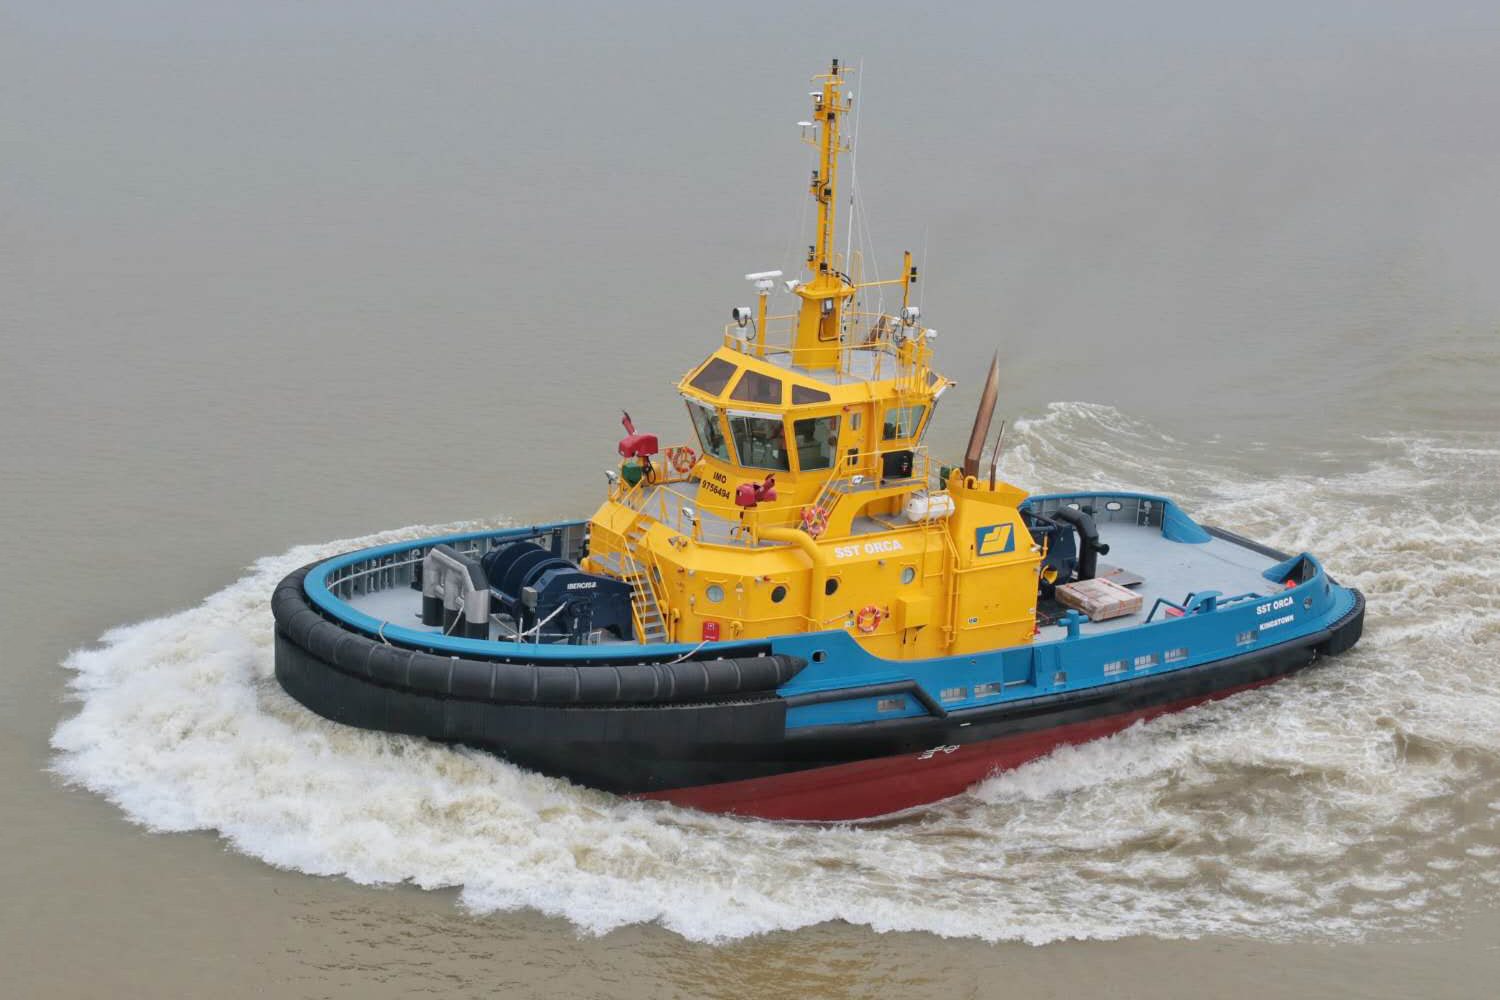 Vancouver to Welcome Two New Cheoy Lee Built RAstar 3200 Escort Tugs for SAAM SMIT Towage Canada